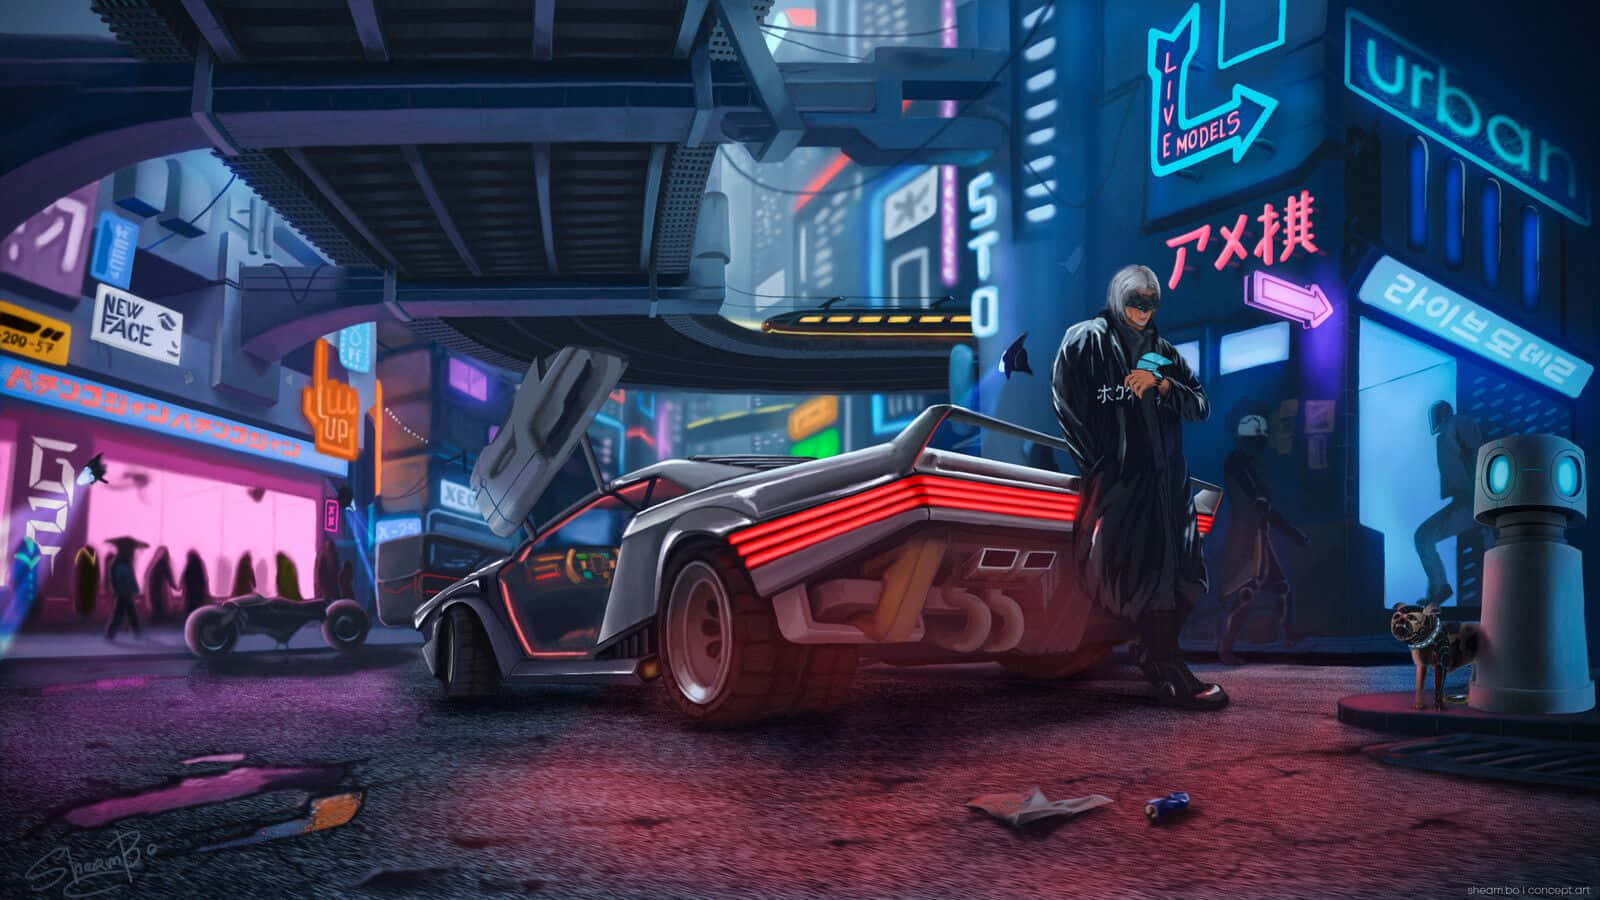 A Futuristic City With A Car And Neon Lights Wallpaper